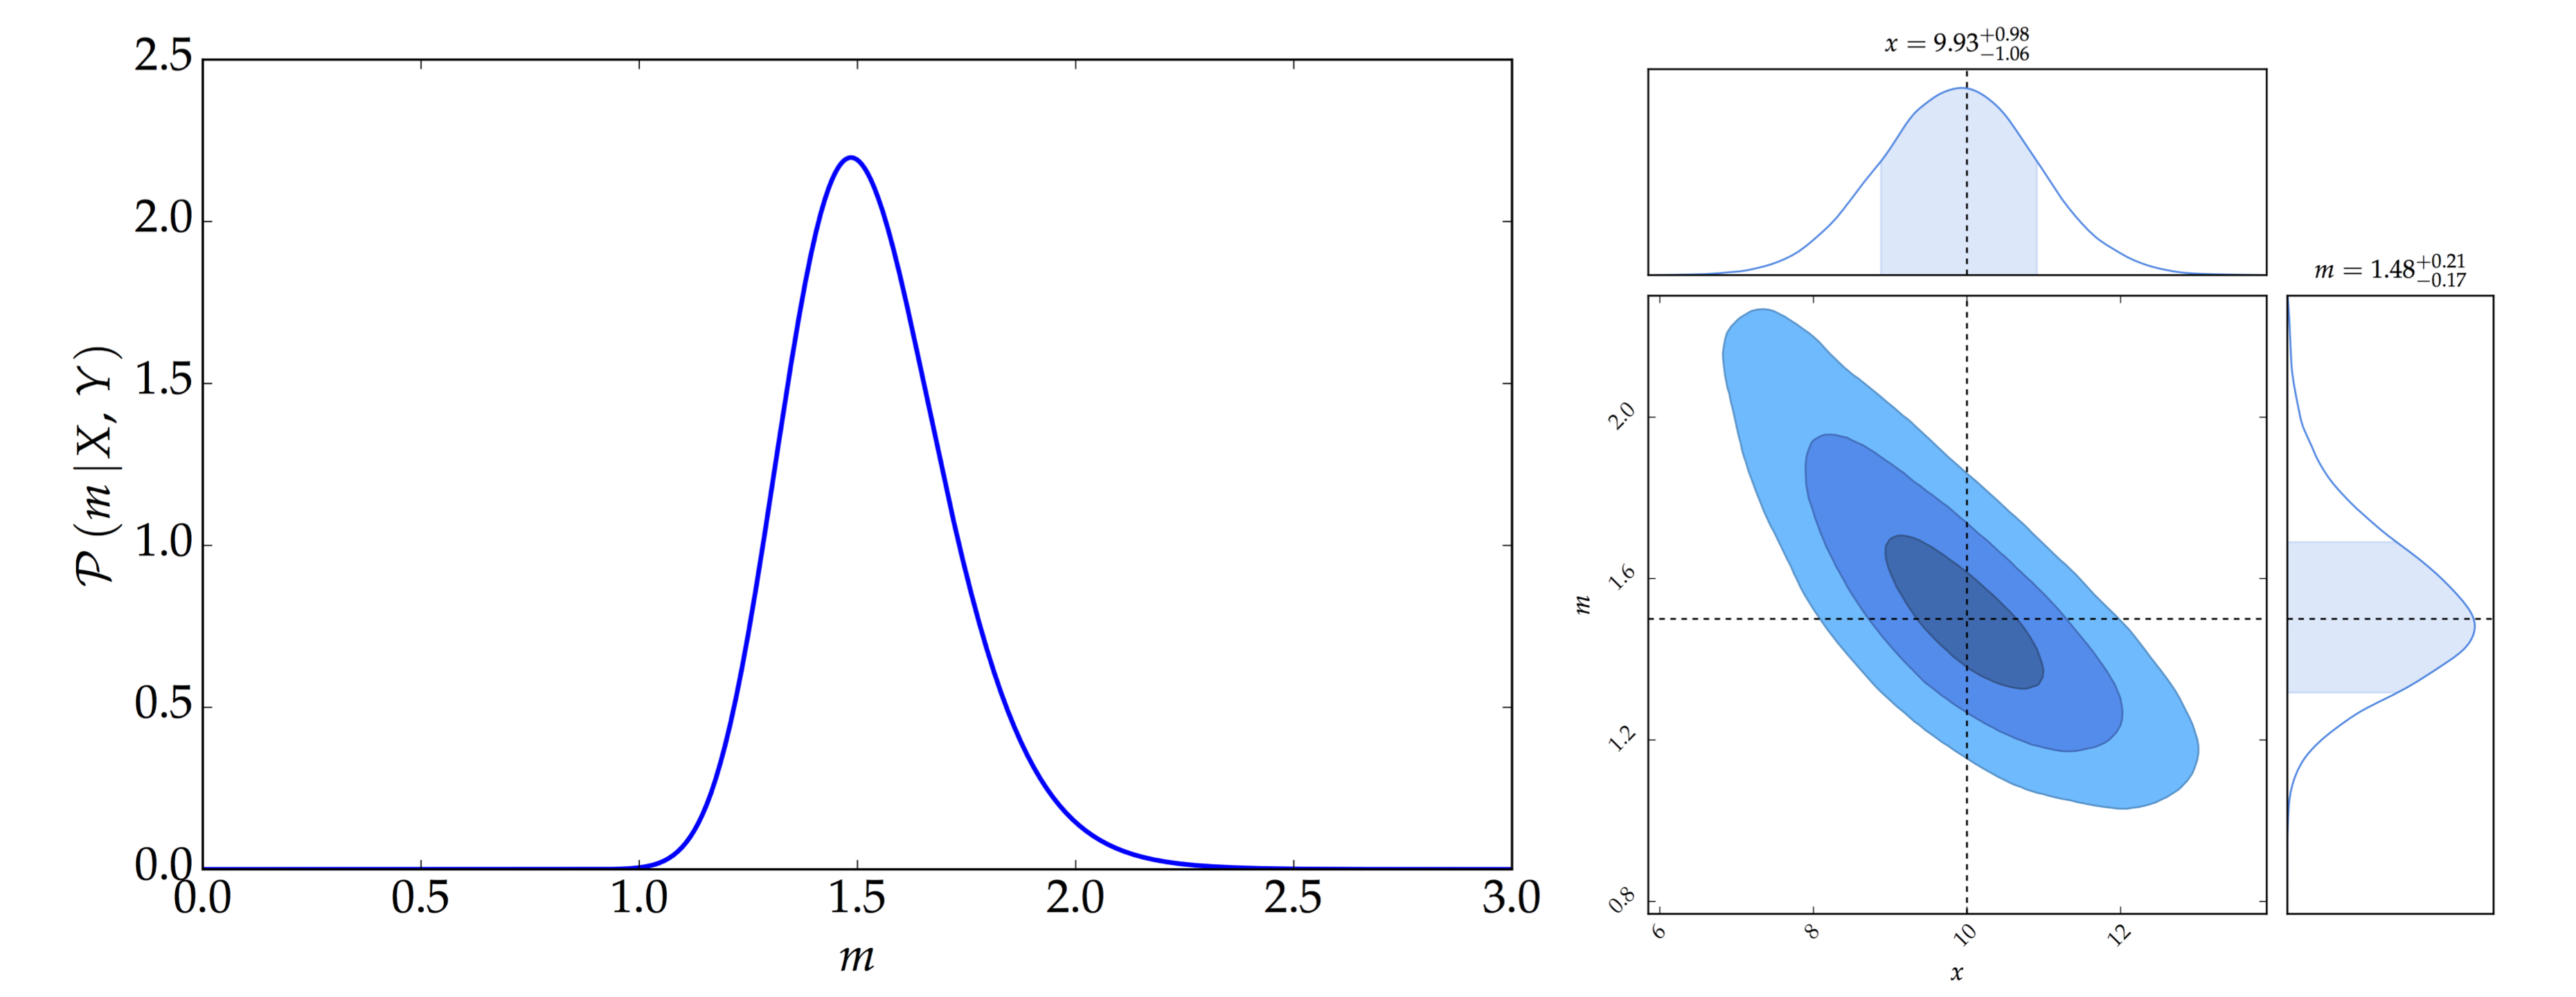 The left panel shows the posterior distribution of $m$ while the right panel shows the joint posterior distribution of $x$ and $m$ using Gibbs Sampling.